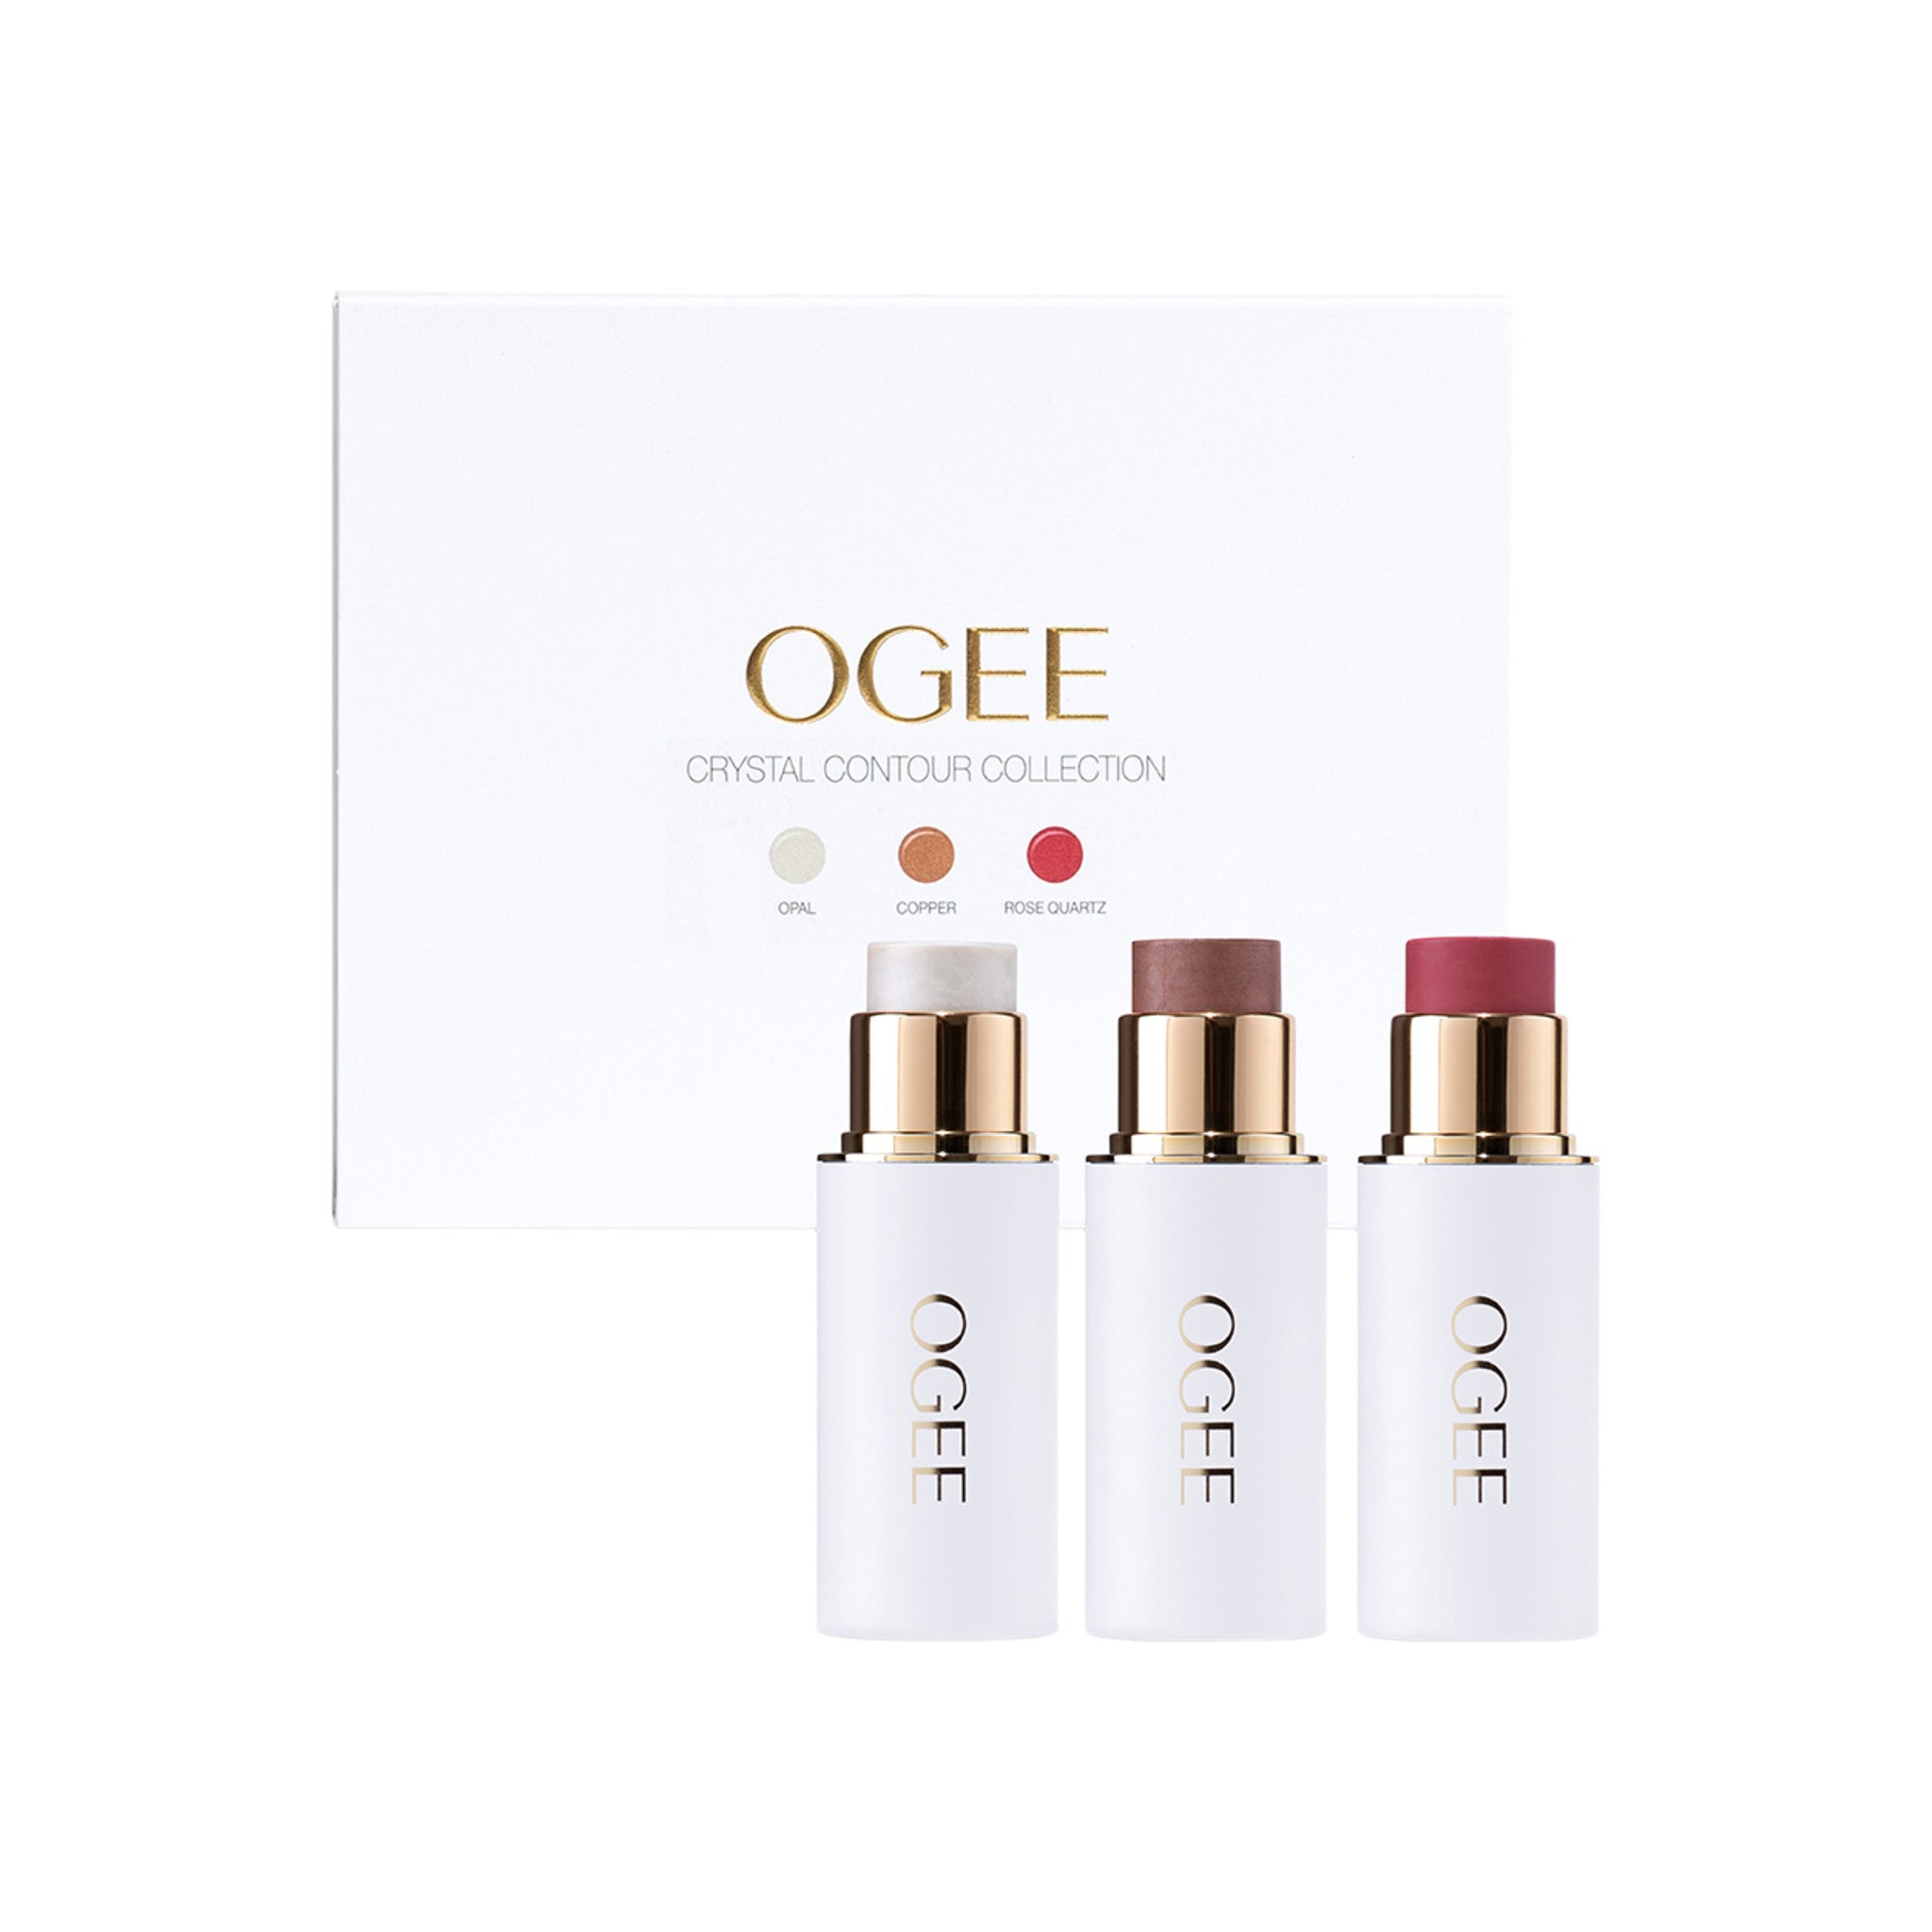 Ogee Crystal Contour Collection